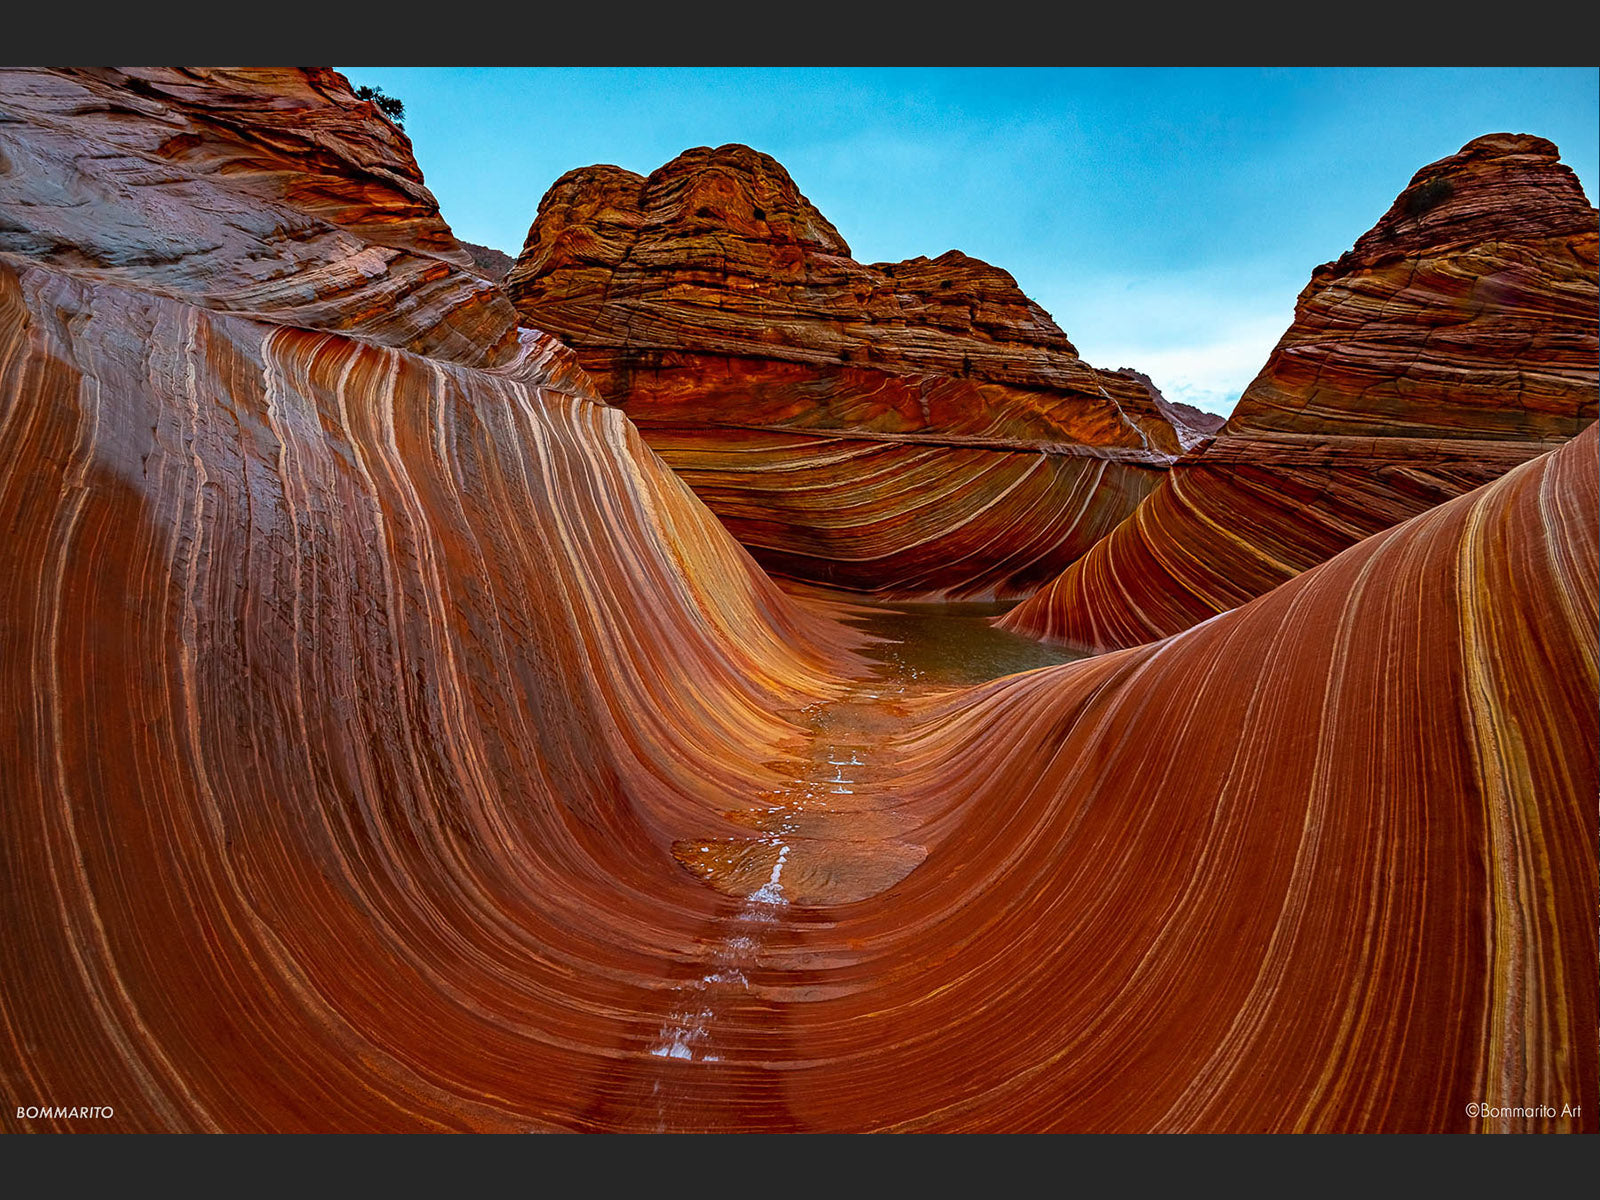 The Wave, Paria Canyon Wilderness